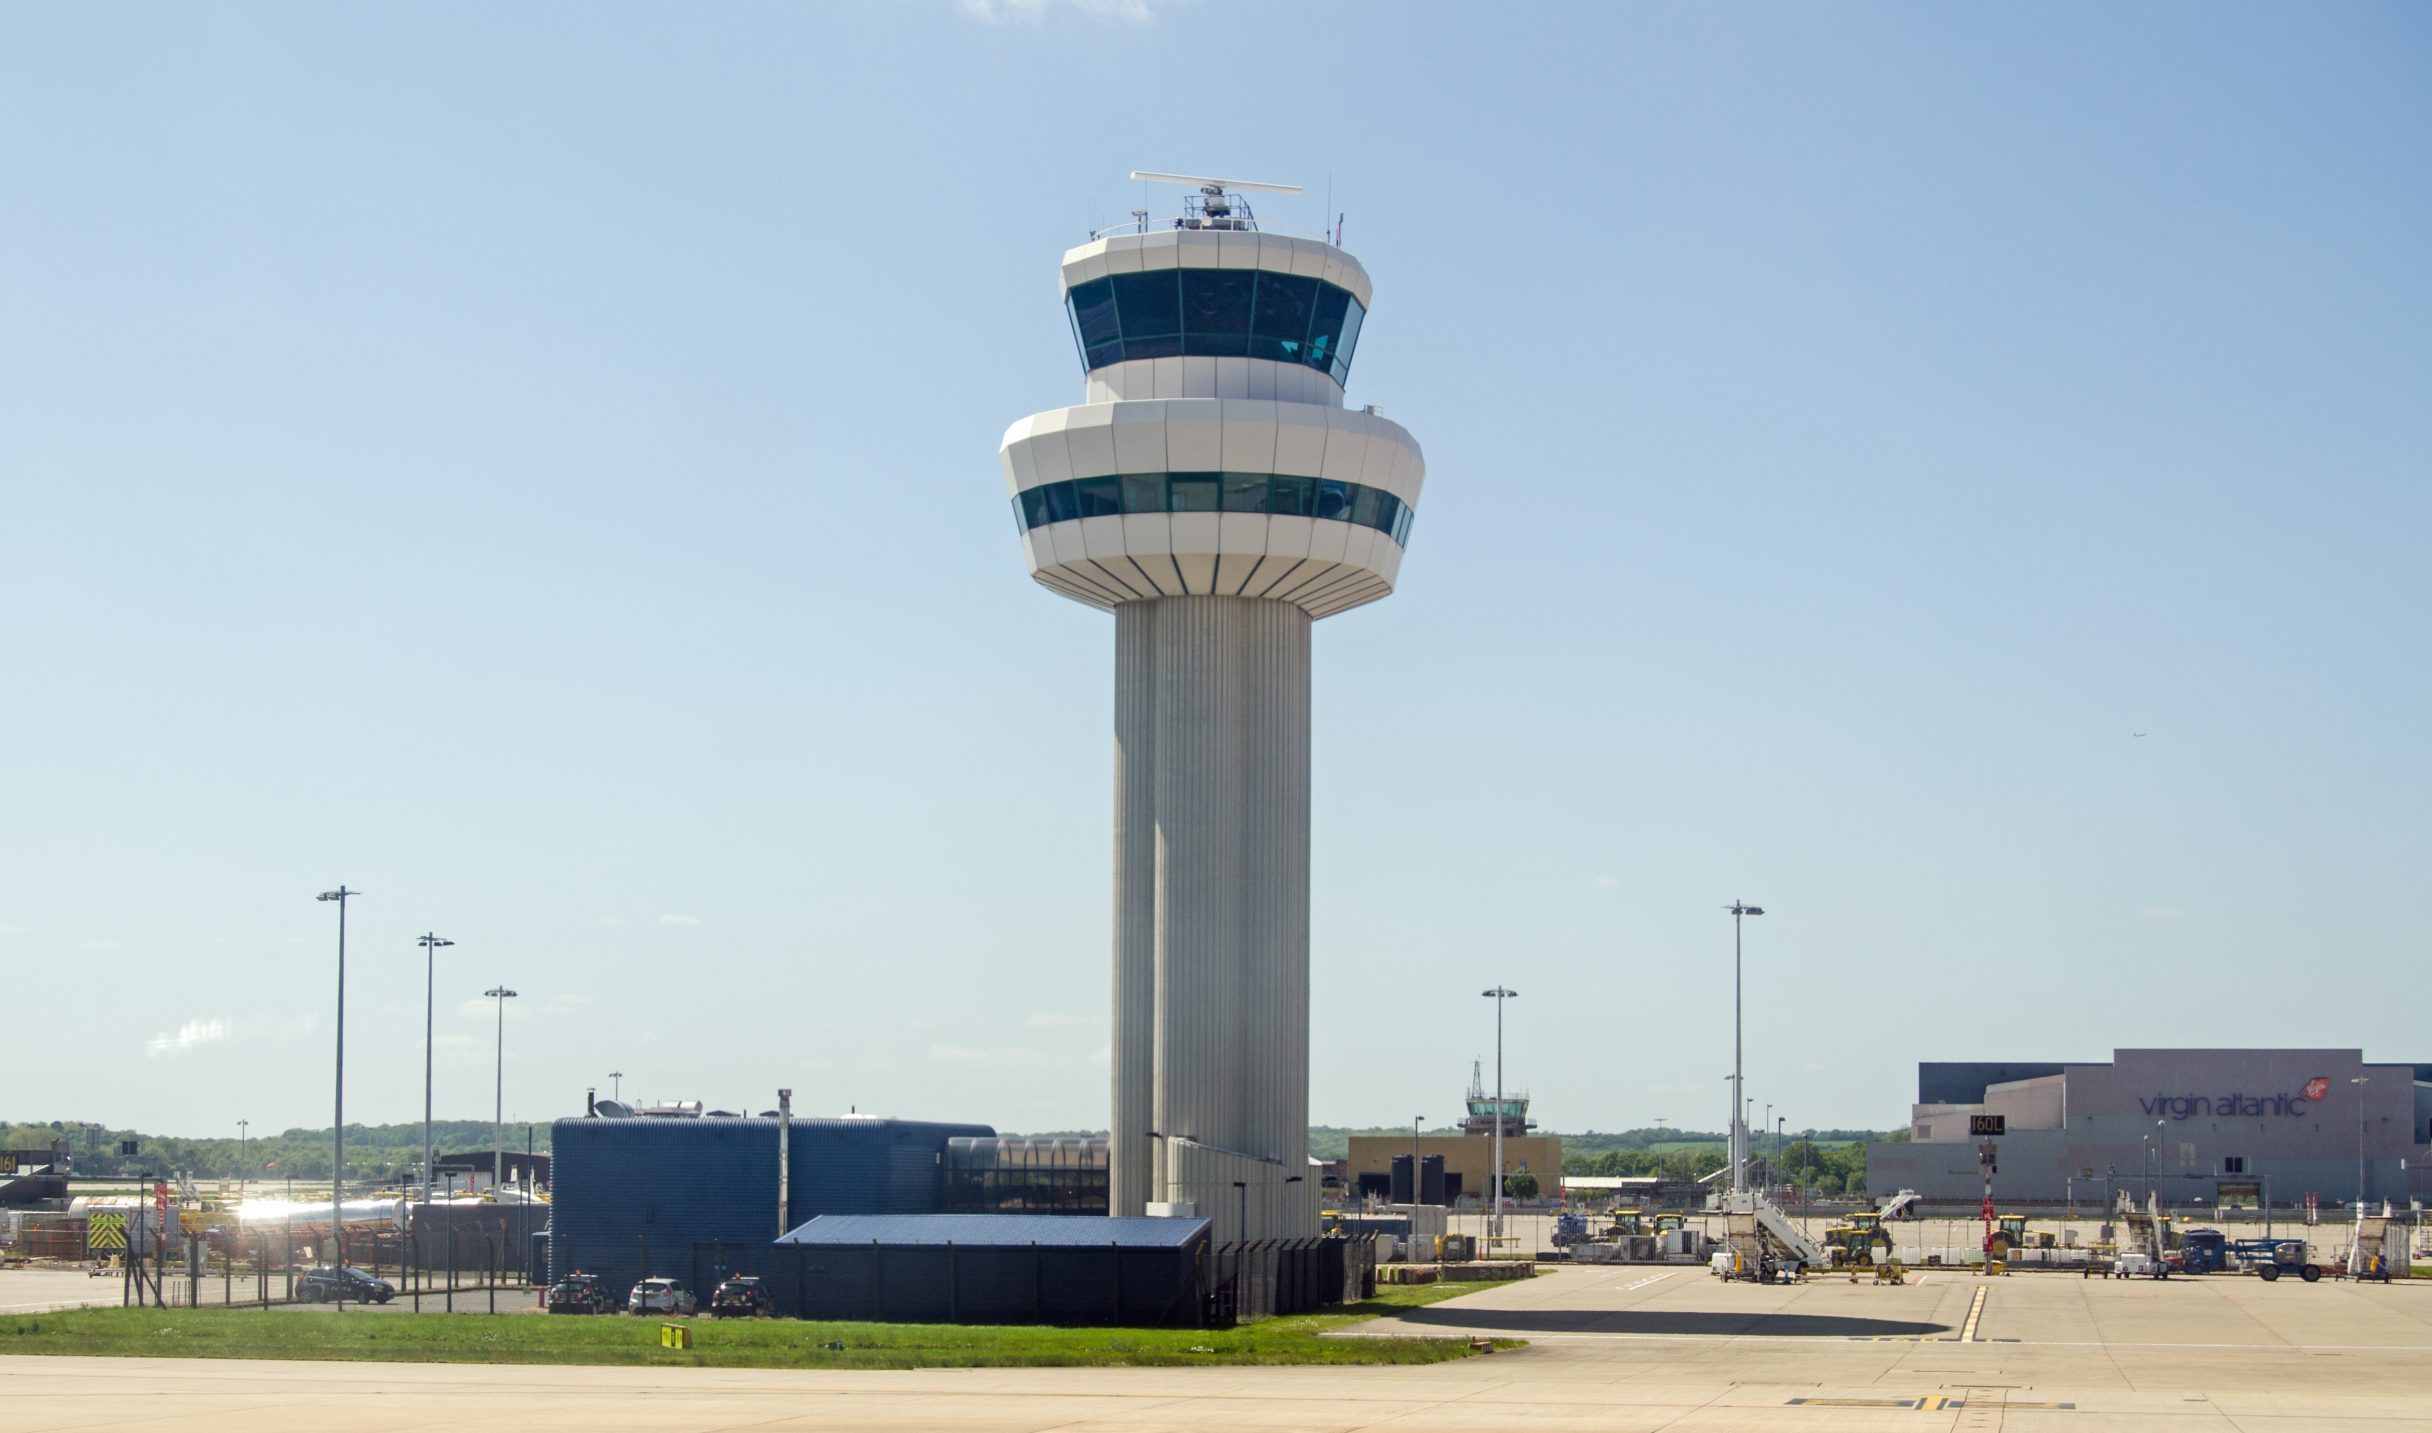 Gatwick Airport, UK - May 16, 2015:  The main control tower at London's Gatwick Airport in West Sussex.